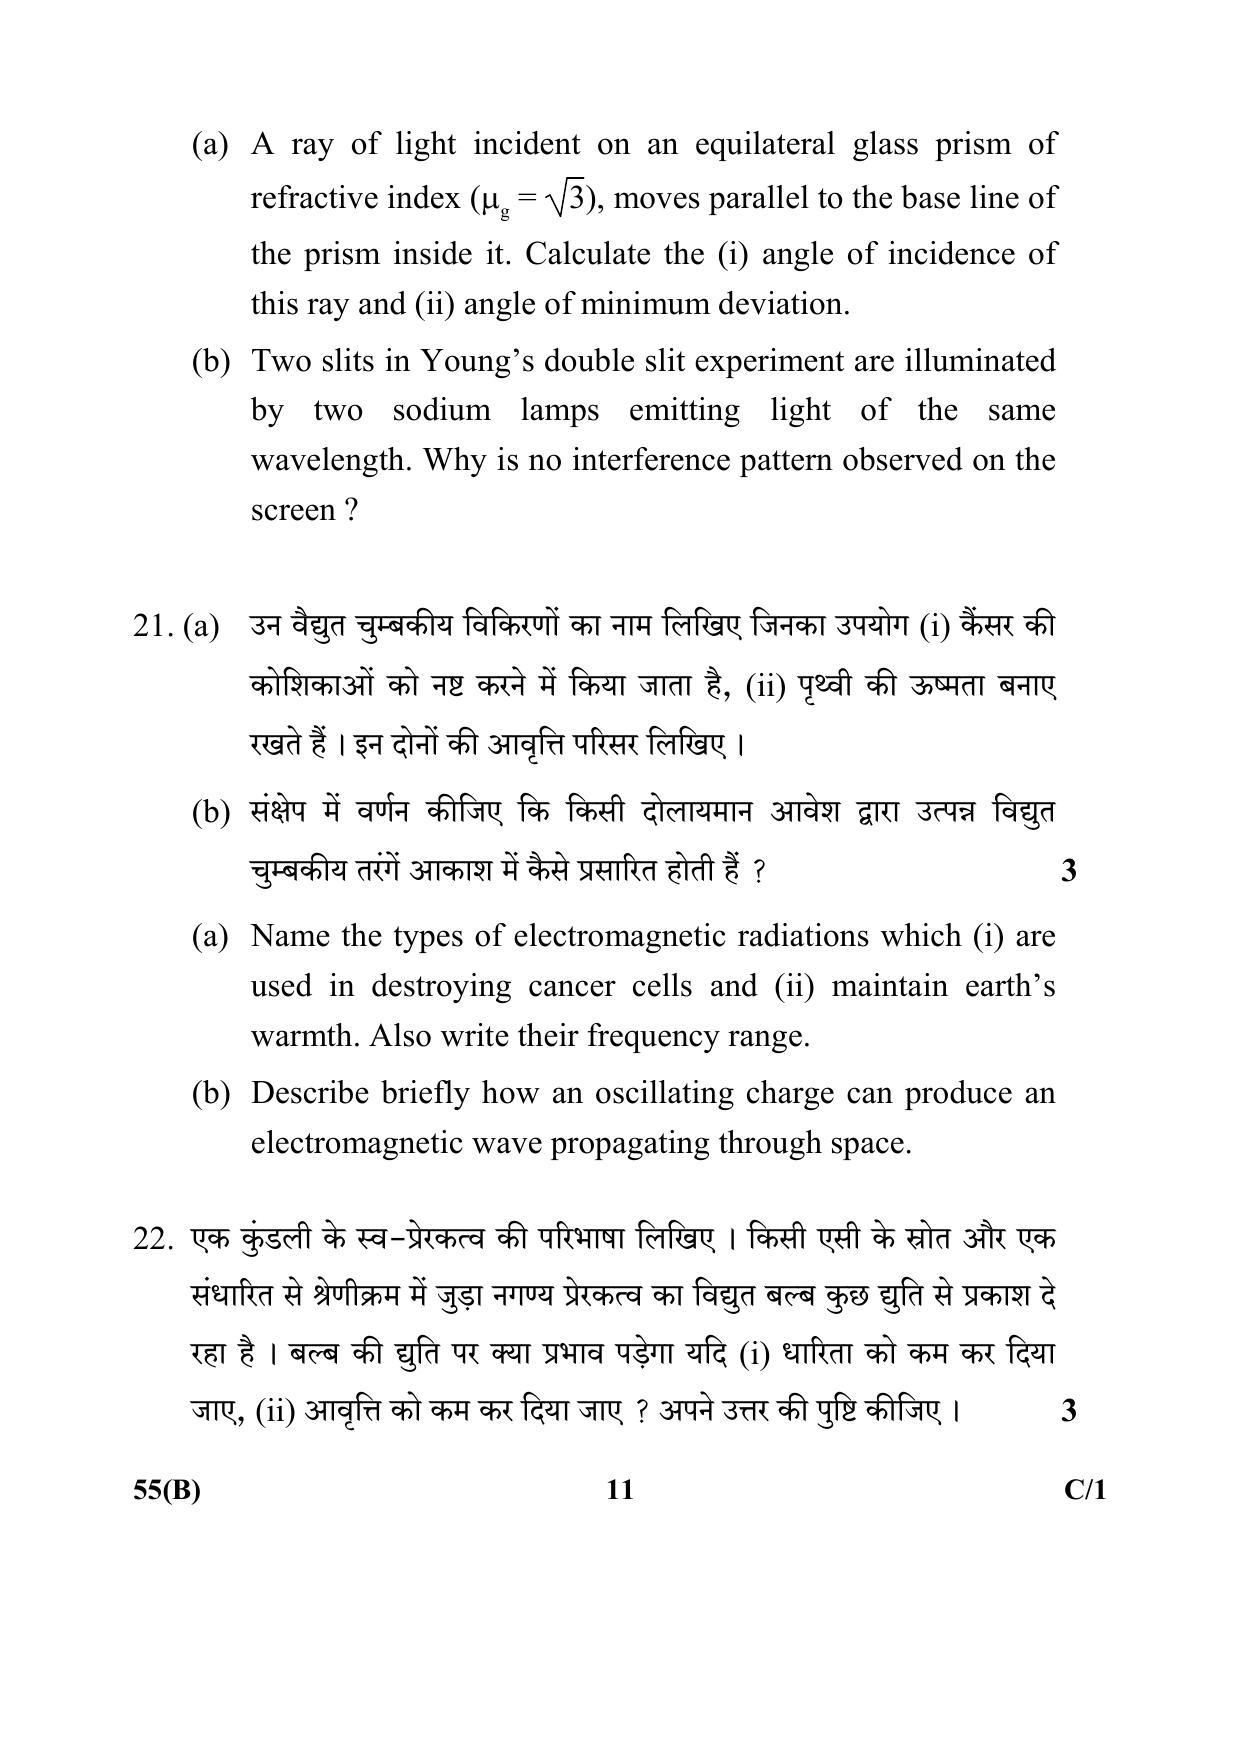 CBSE Class 12 55(B) (Physics) 2018 Compartment Question Paper - Page 11